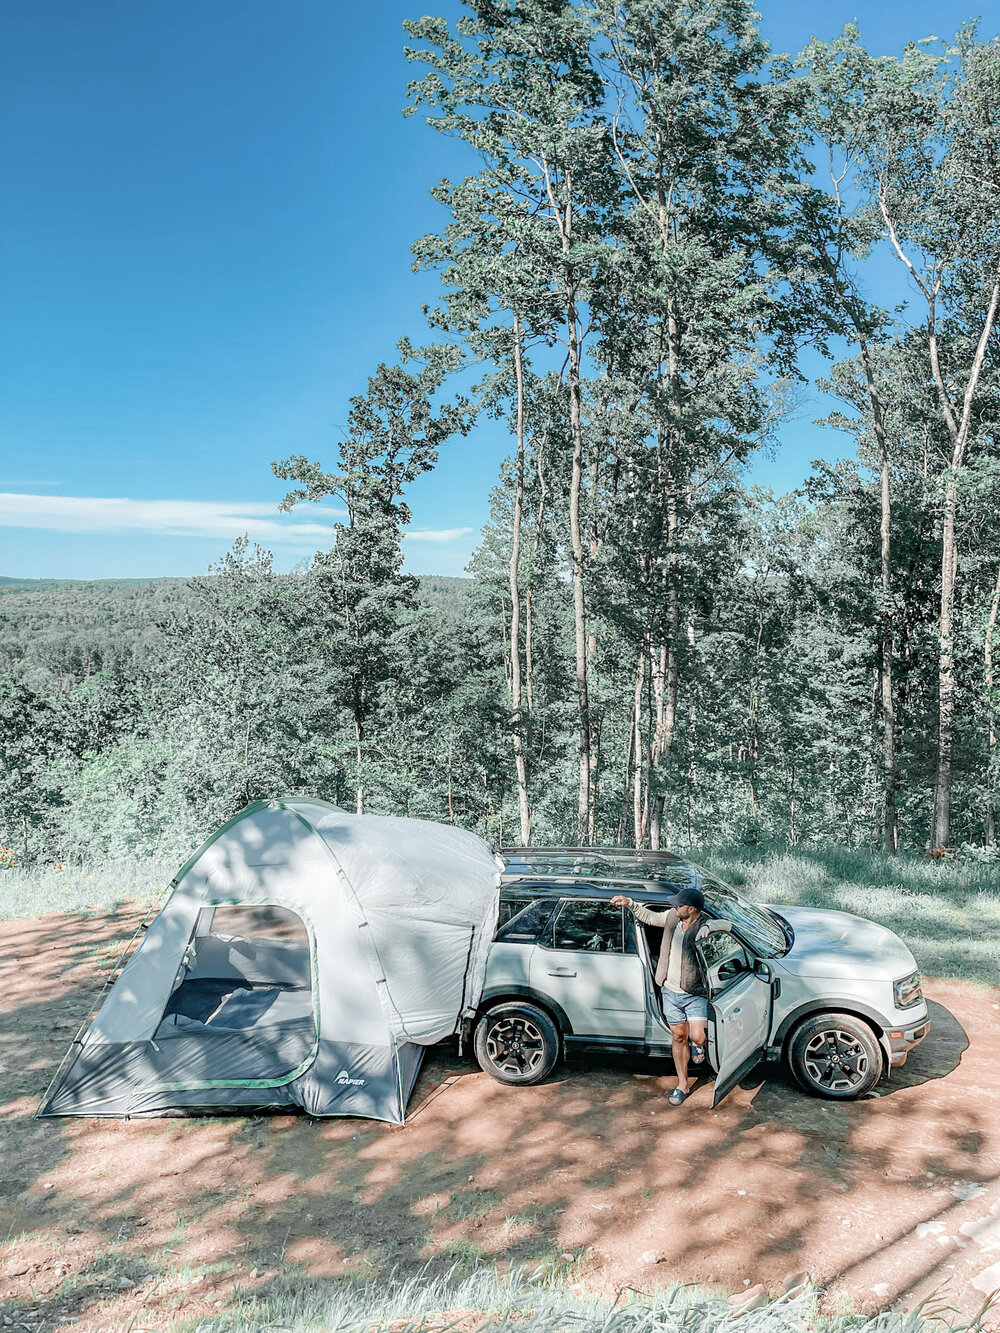 Lost with Luis: 10 Tips for Your Next Off-Road Car Camping